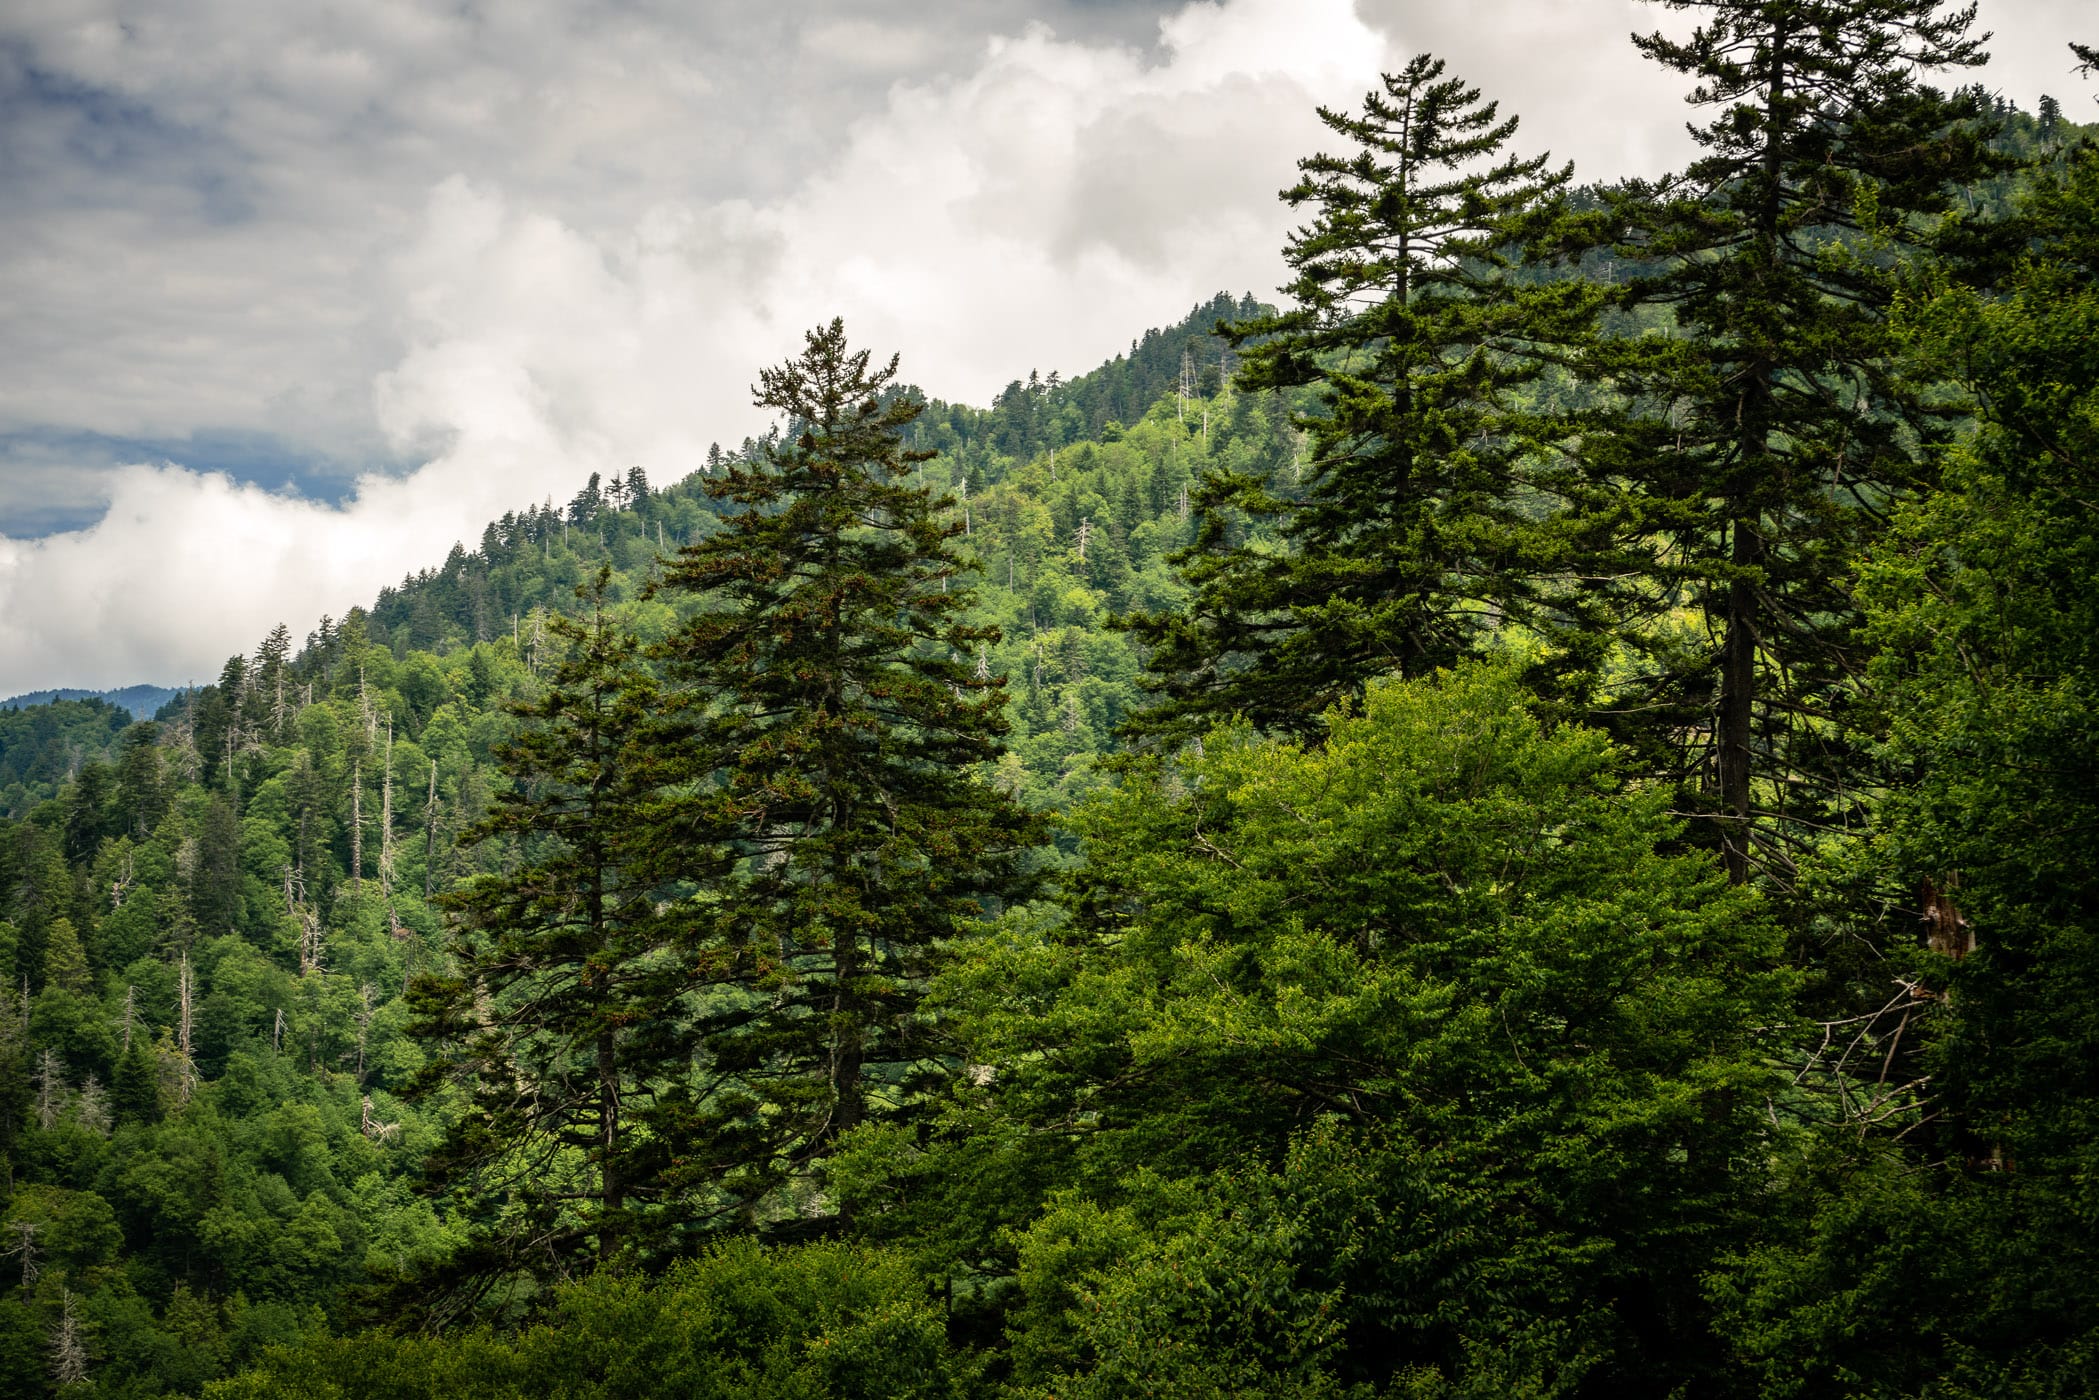 Trees grown on a mountainside in Tennessee's Great Smoky Mountains National Park.